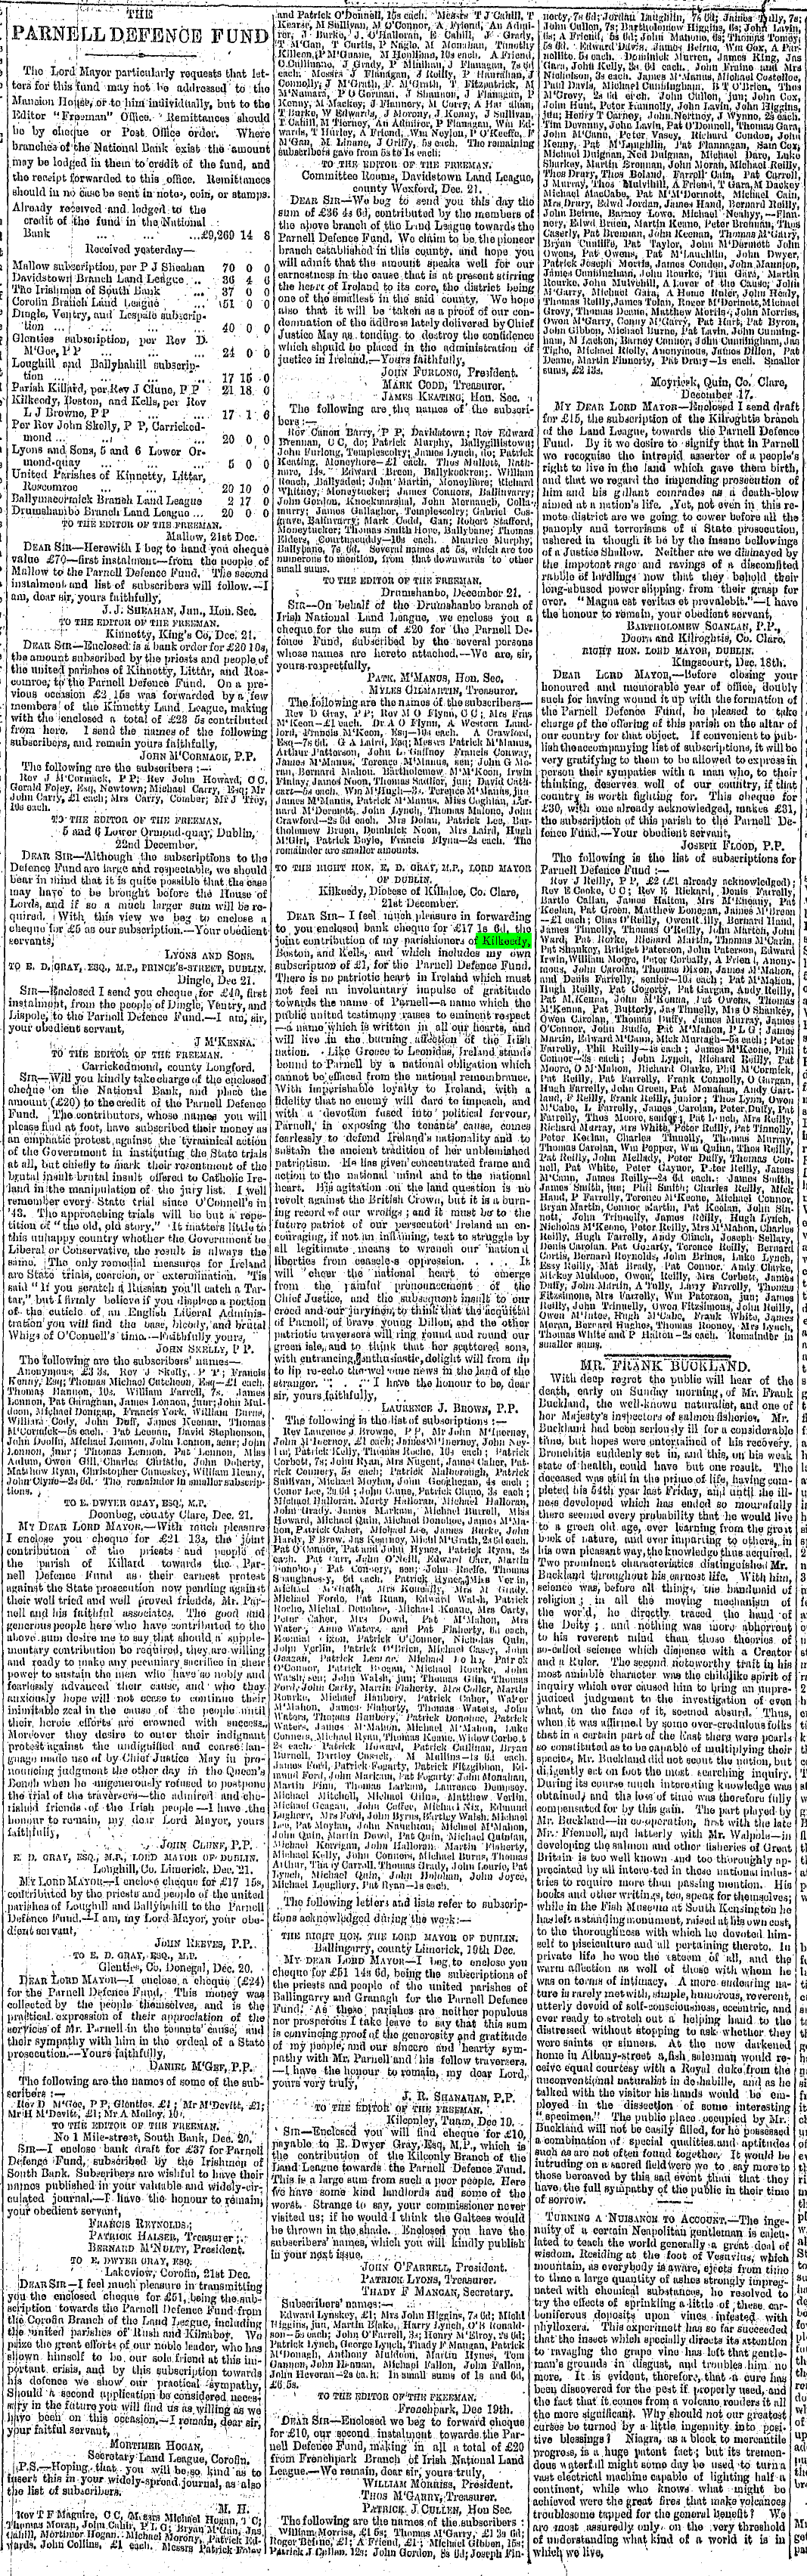 Parnell Defence Fund contributions Dec 1880.png